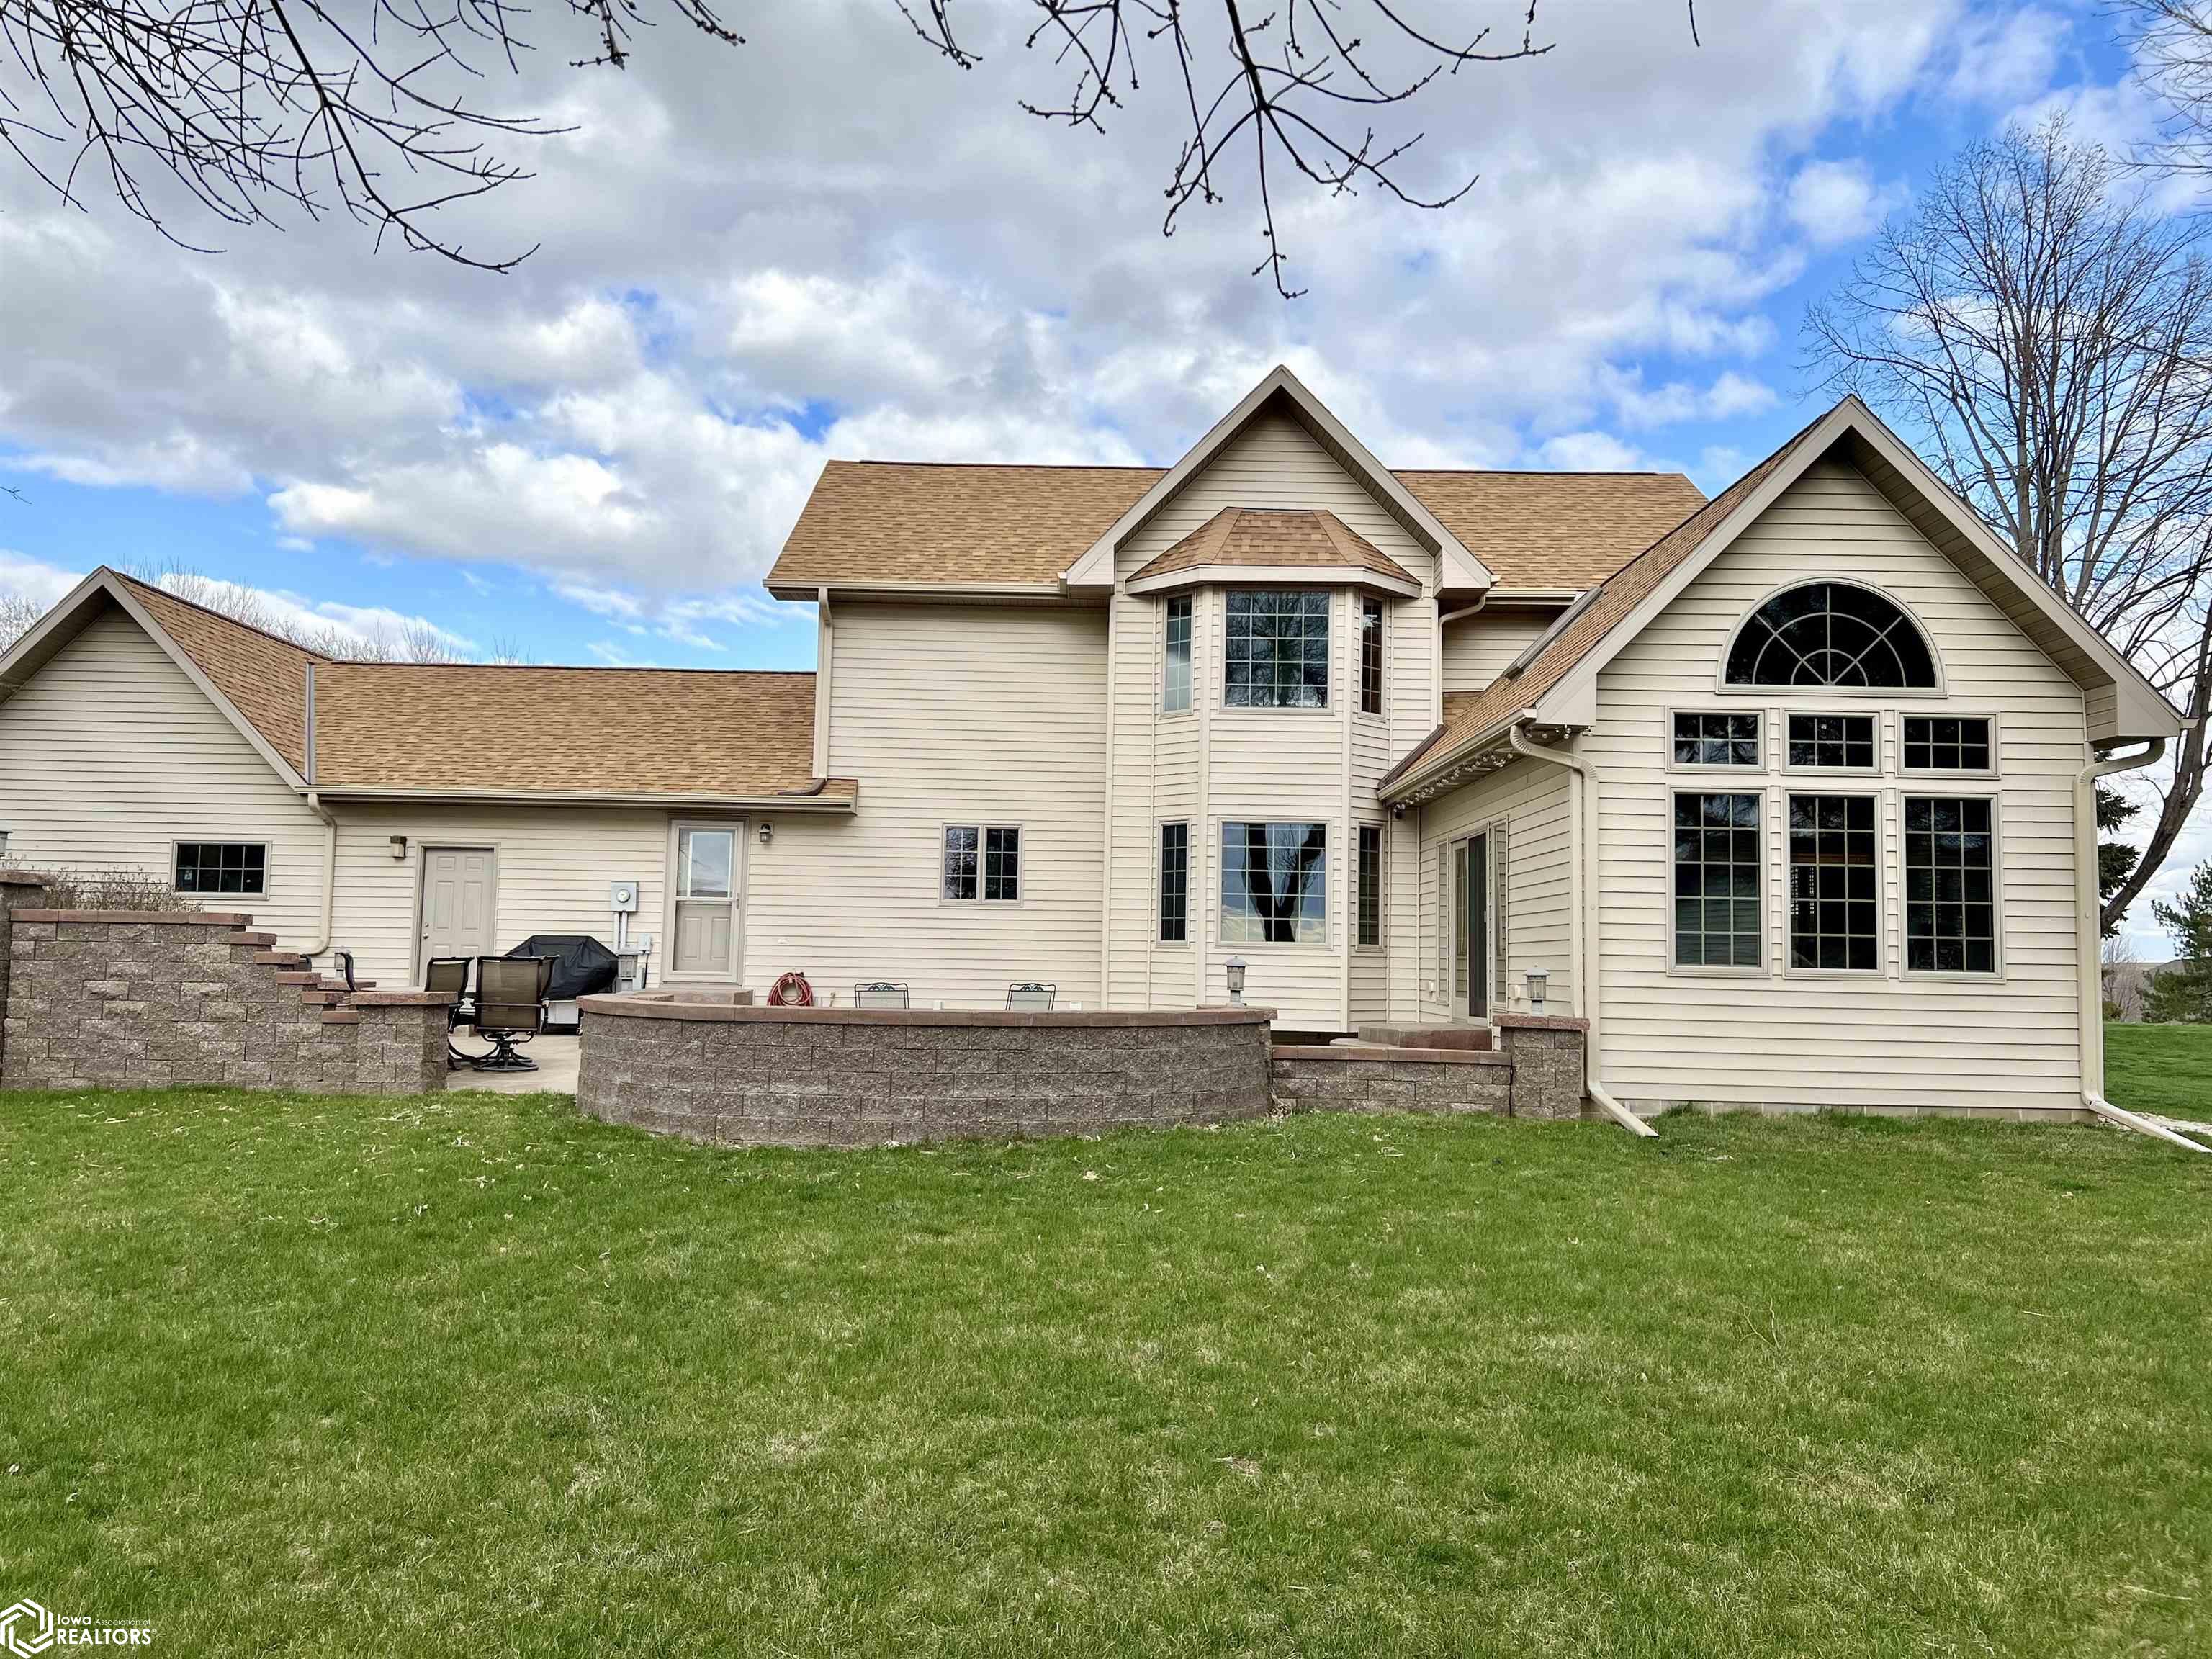 1108 Valley View Dr, Ida Grove, Iowa 51445, 4 Bedrooms Bedrooms, ,3 BathroomsBathrooms,Single Family,For Sale,Valley View Dr,6316338